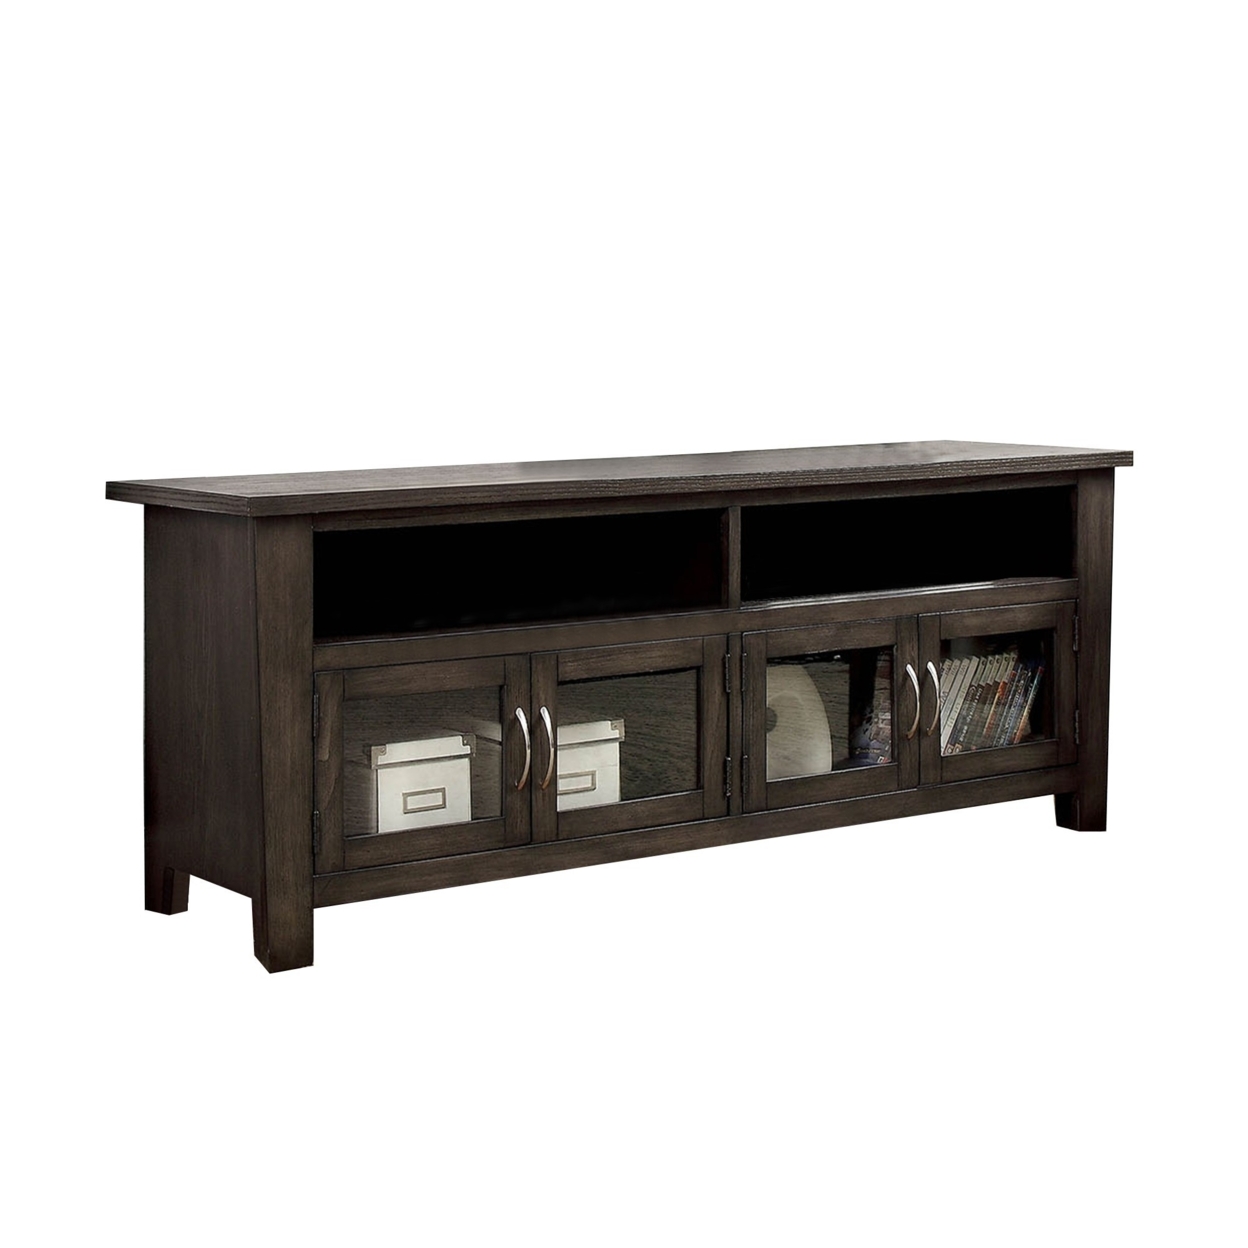 60 Wooden TV Stand With 2 Cabinets And 2 Open Shelves In Brown- Saltoro Sherpi